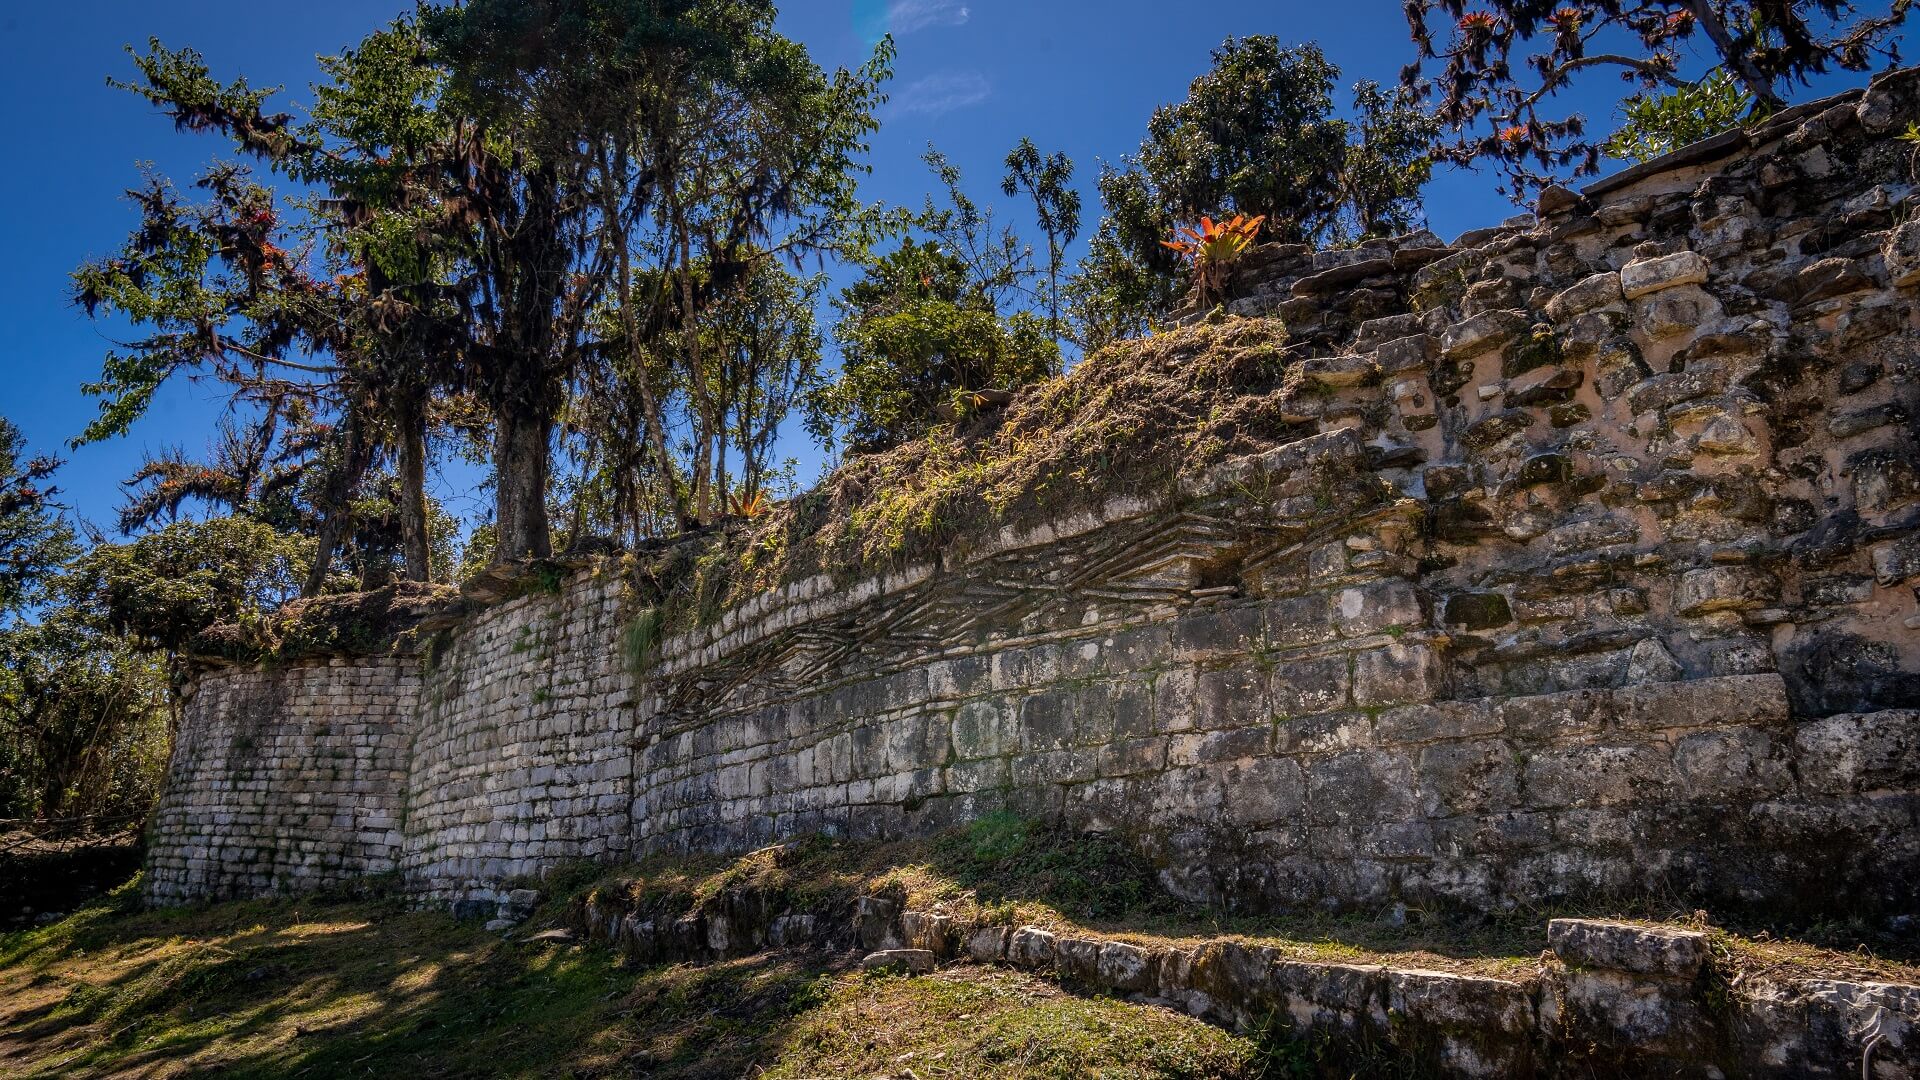 Visit the impressive Yalape Archaeological site as an alternative to the currently closed Kuelap, near Chachapoyas, with RESPONSible Travel Peru.